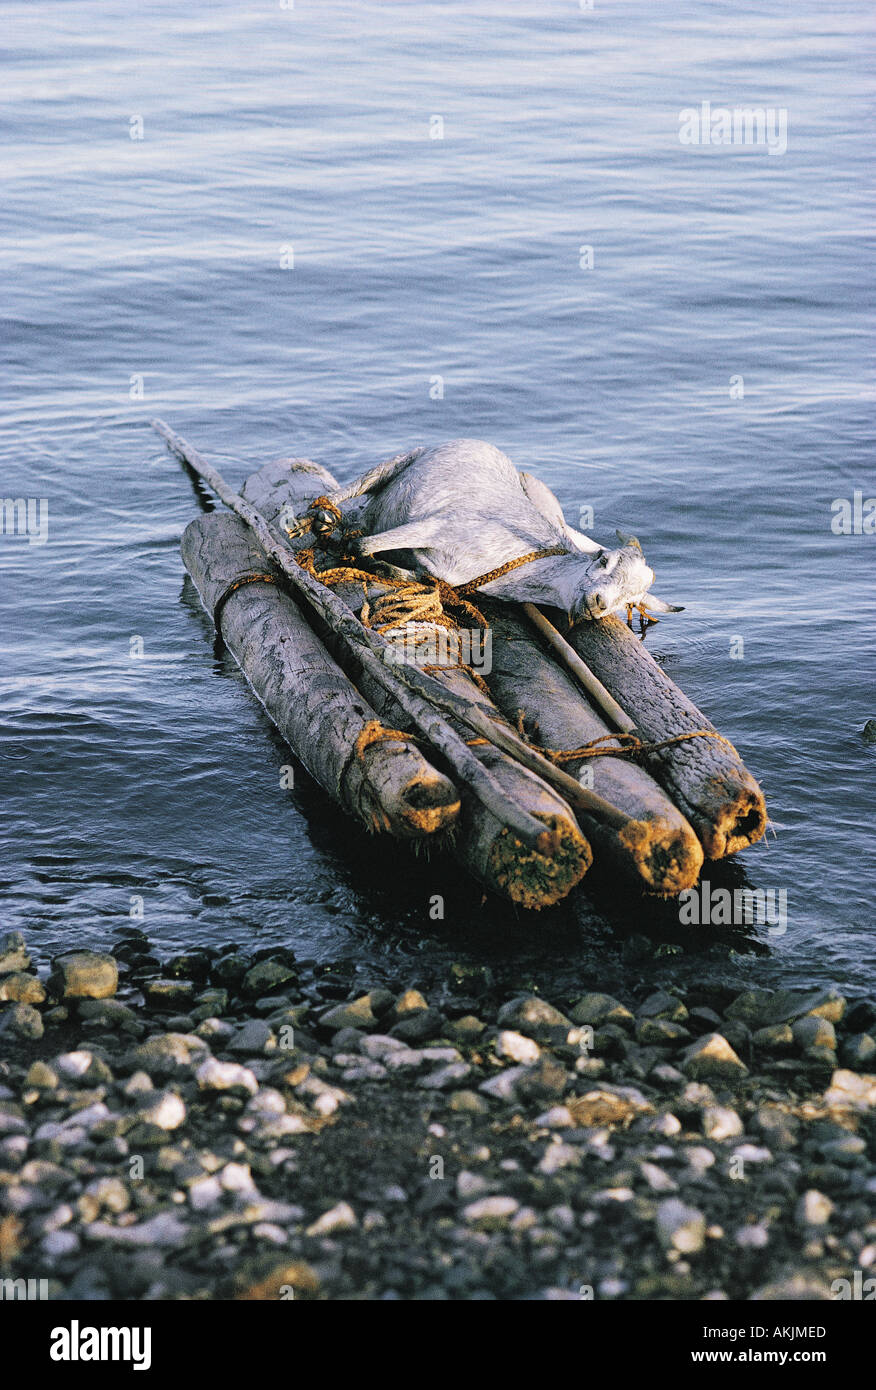 El Molo palm log raft with tethered goat that has just been paddled across El Molo Bay Stock Photo